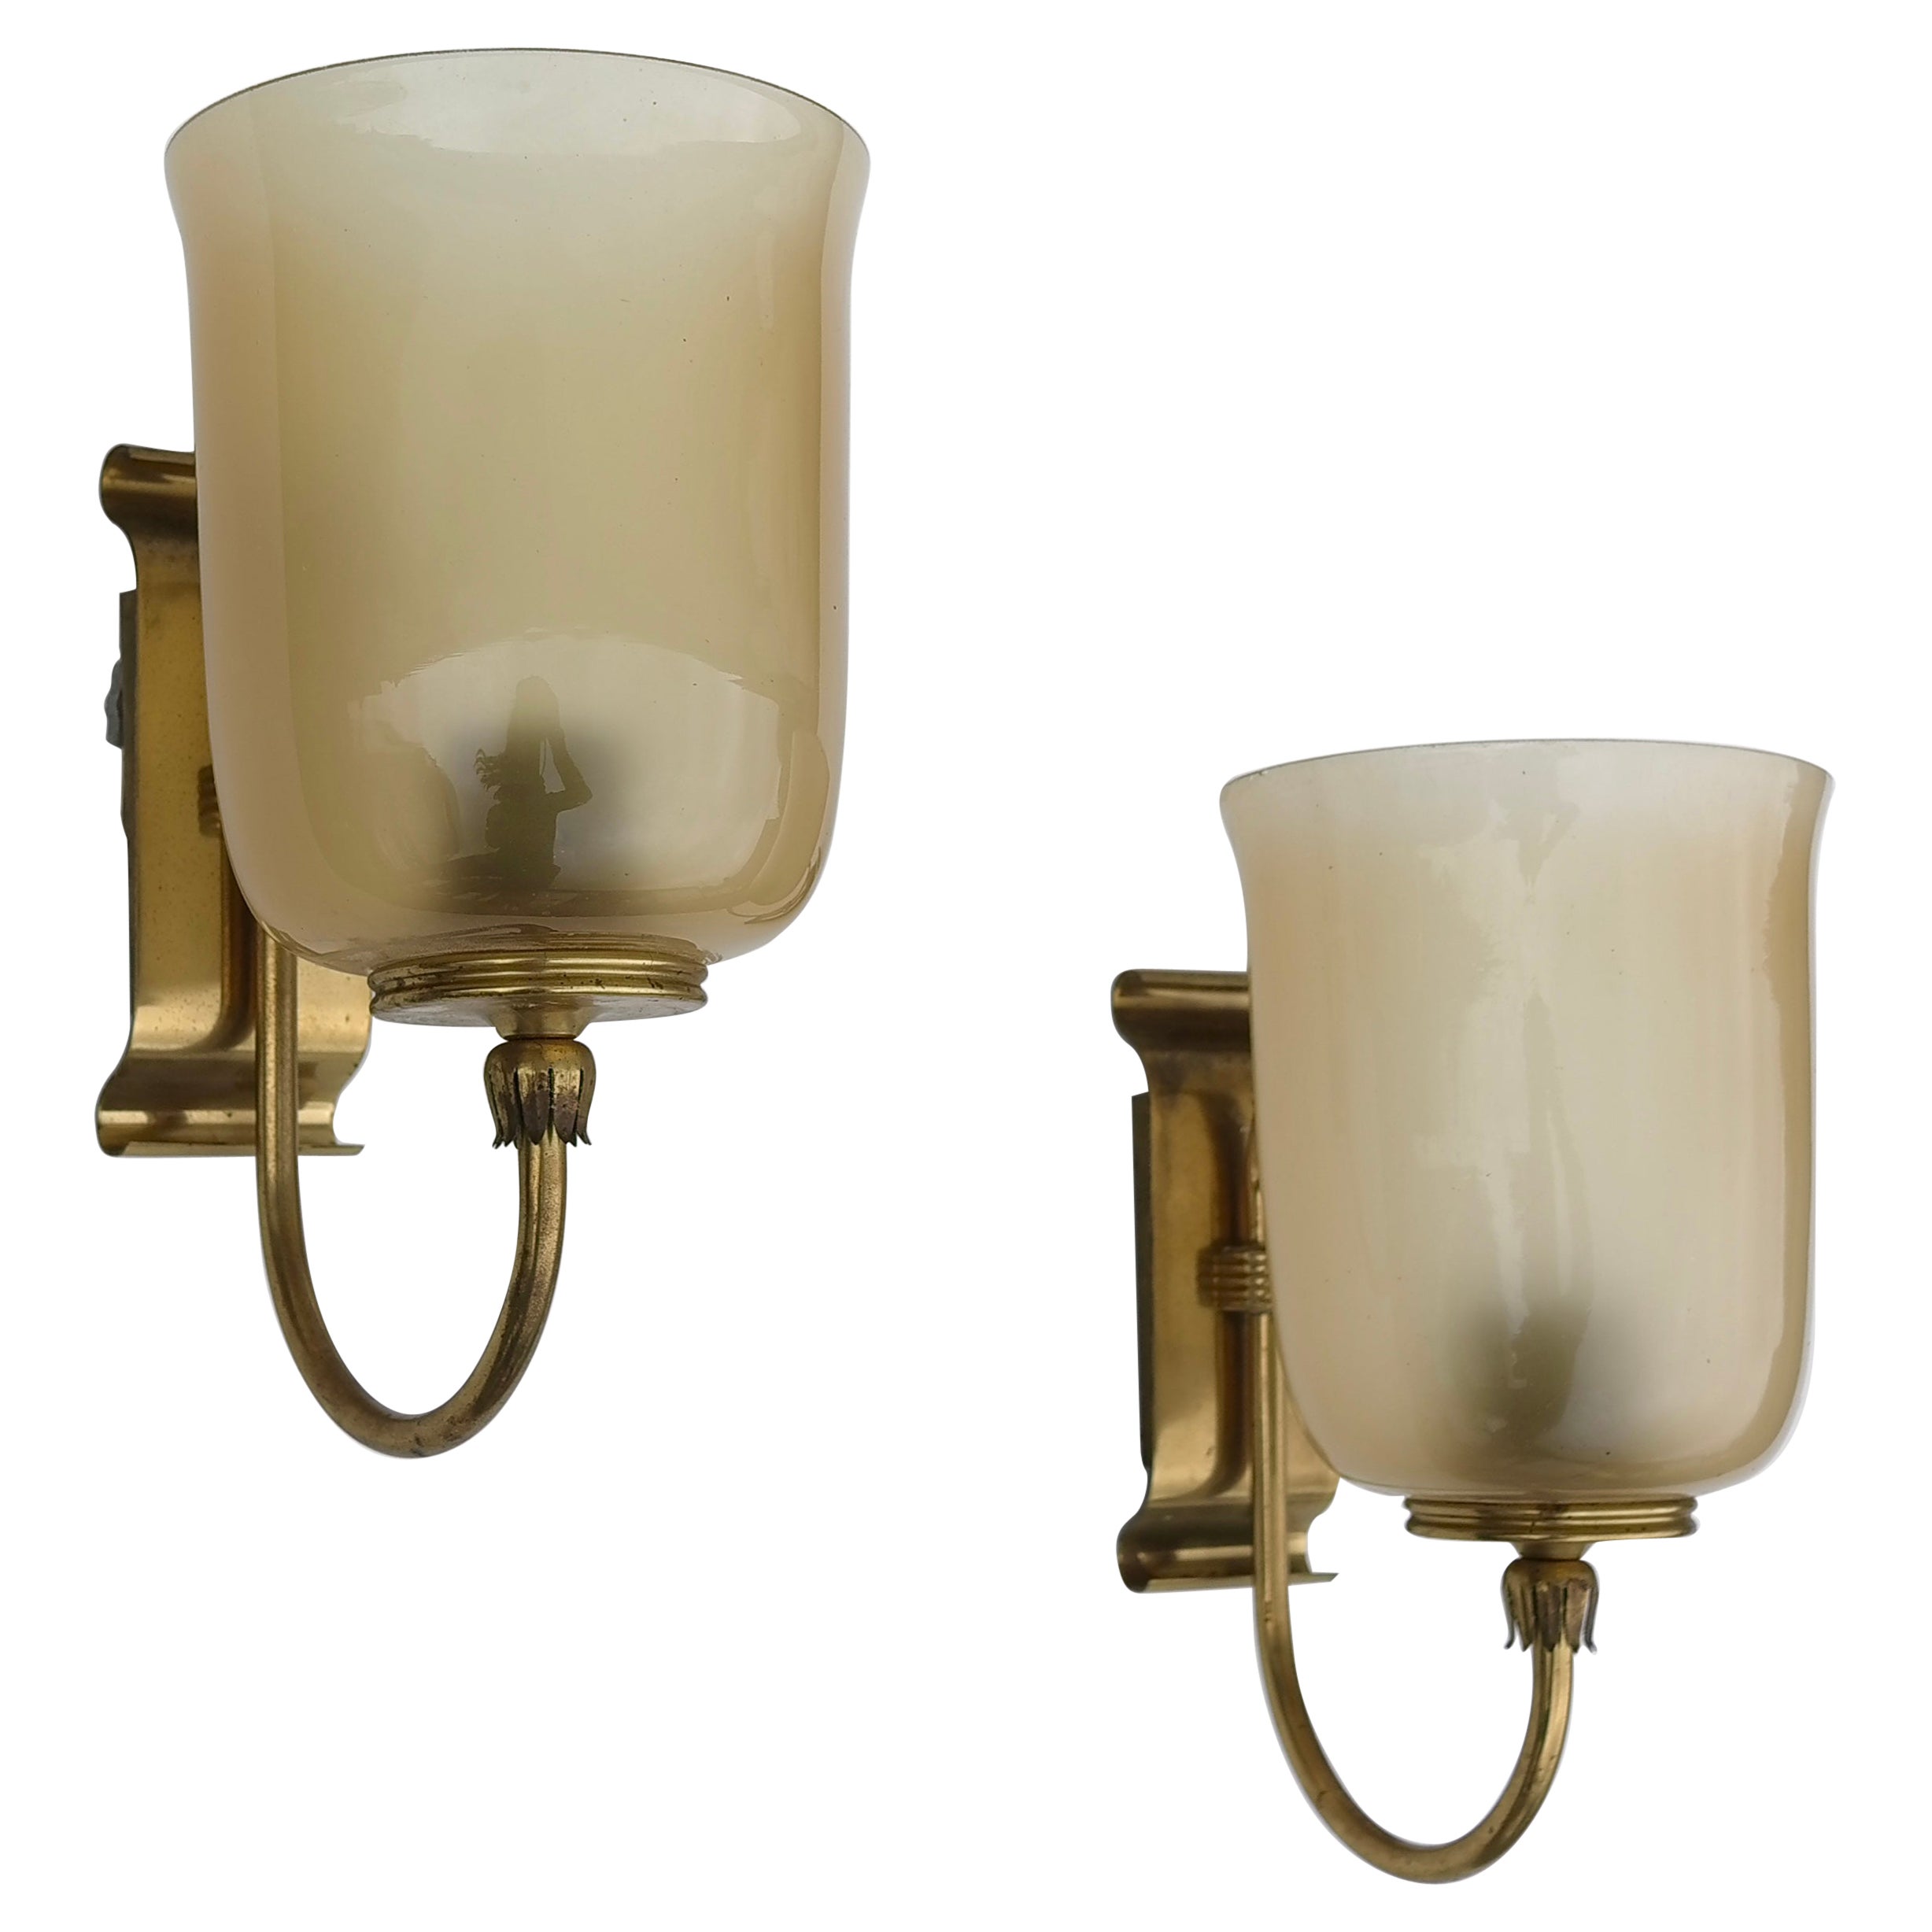 Murano Wall Lamps in Champagne Amber Color Glass and Brass details, Italy 1950's